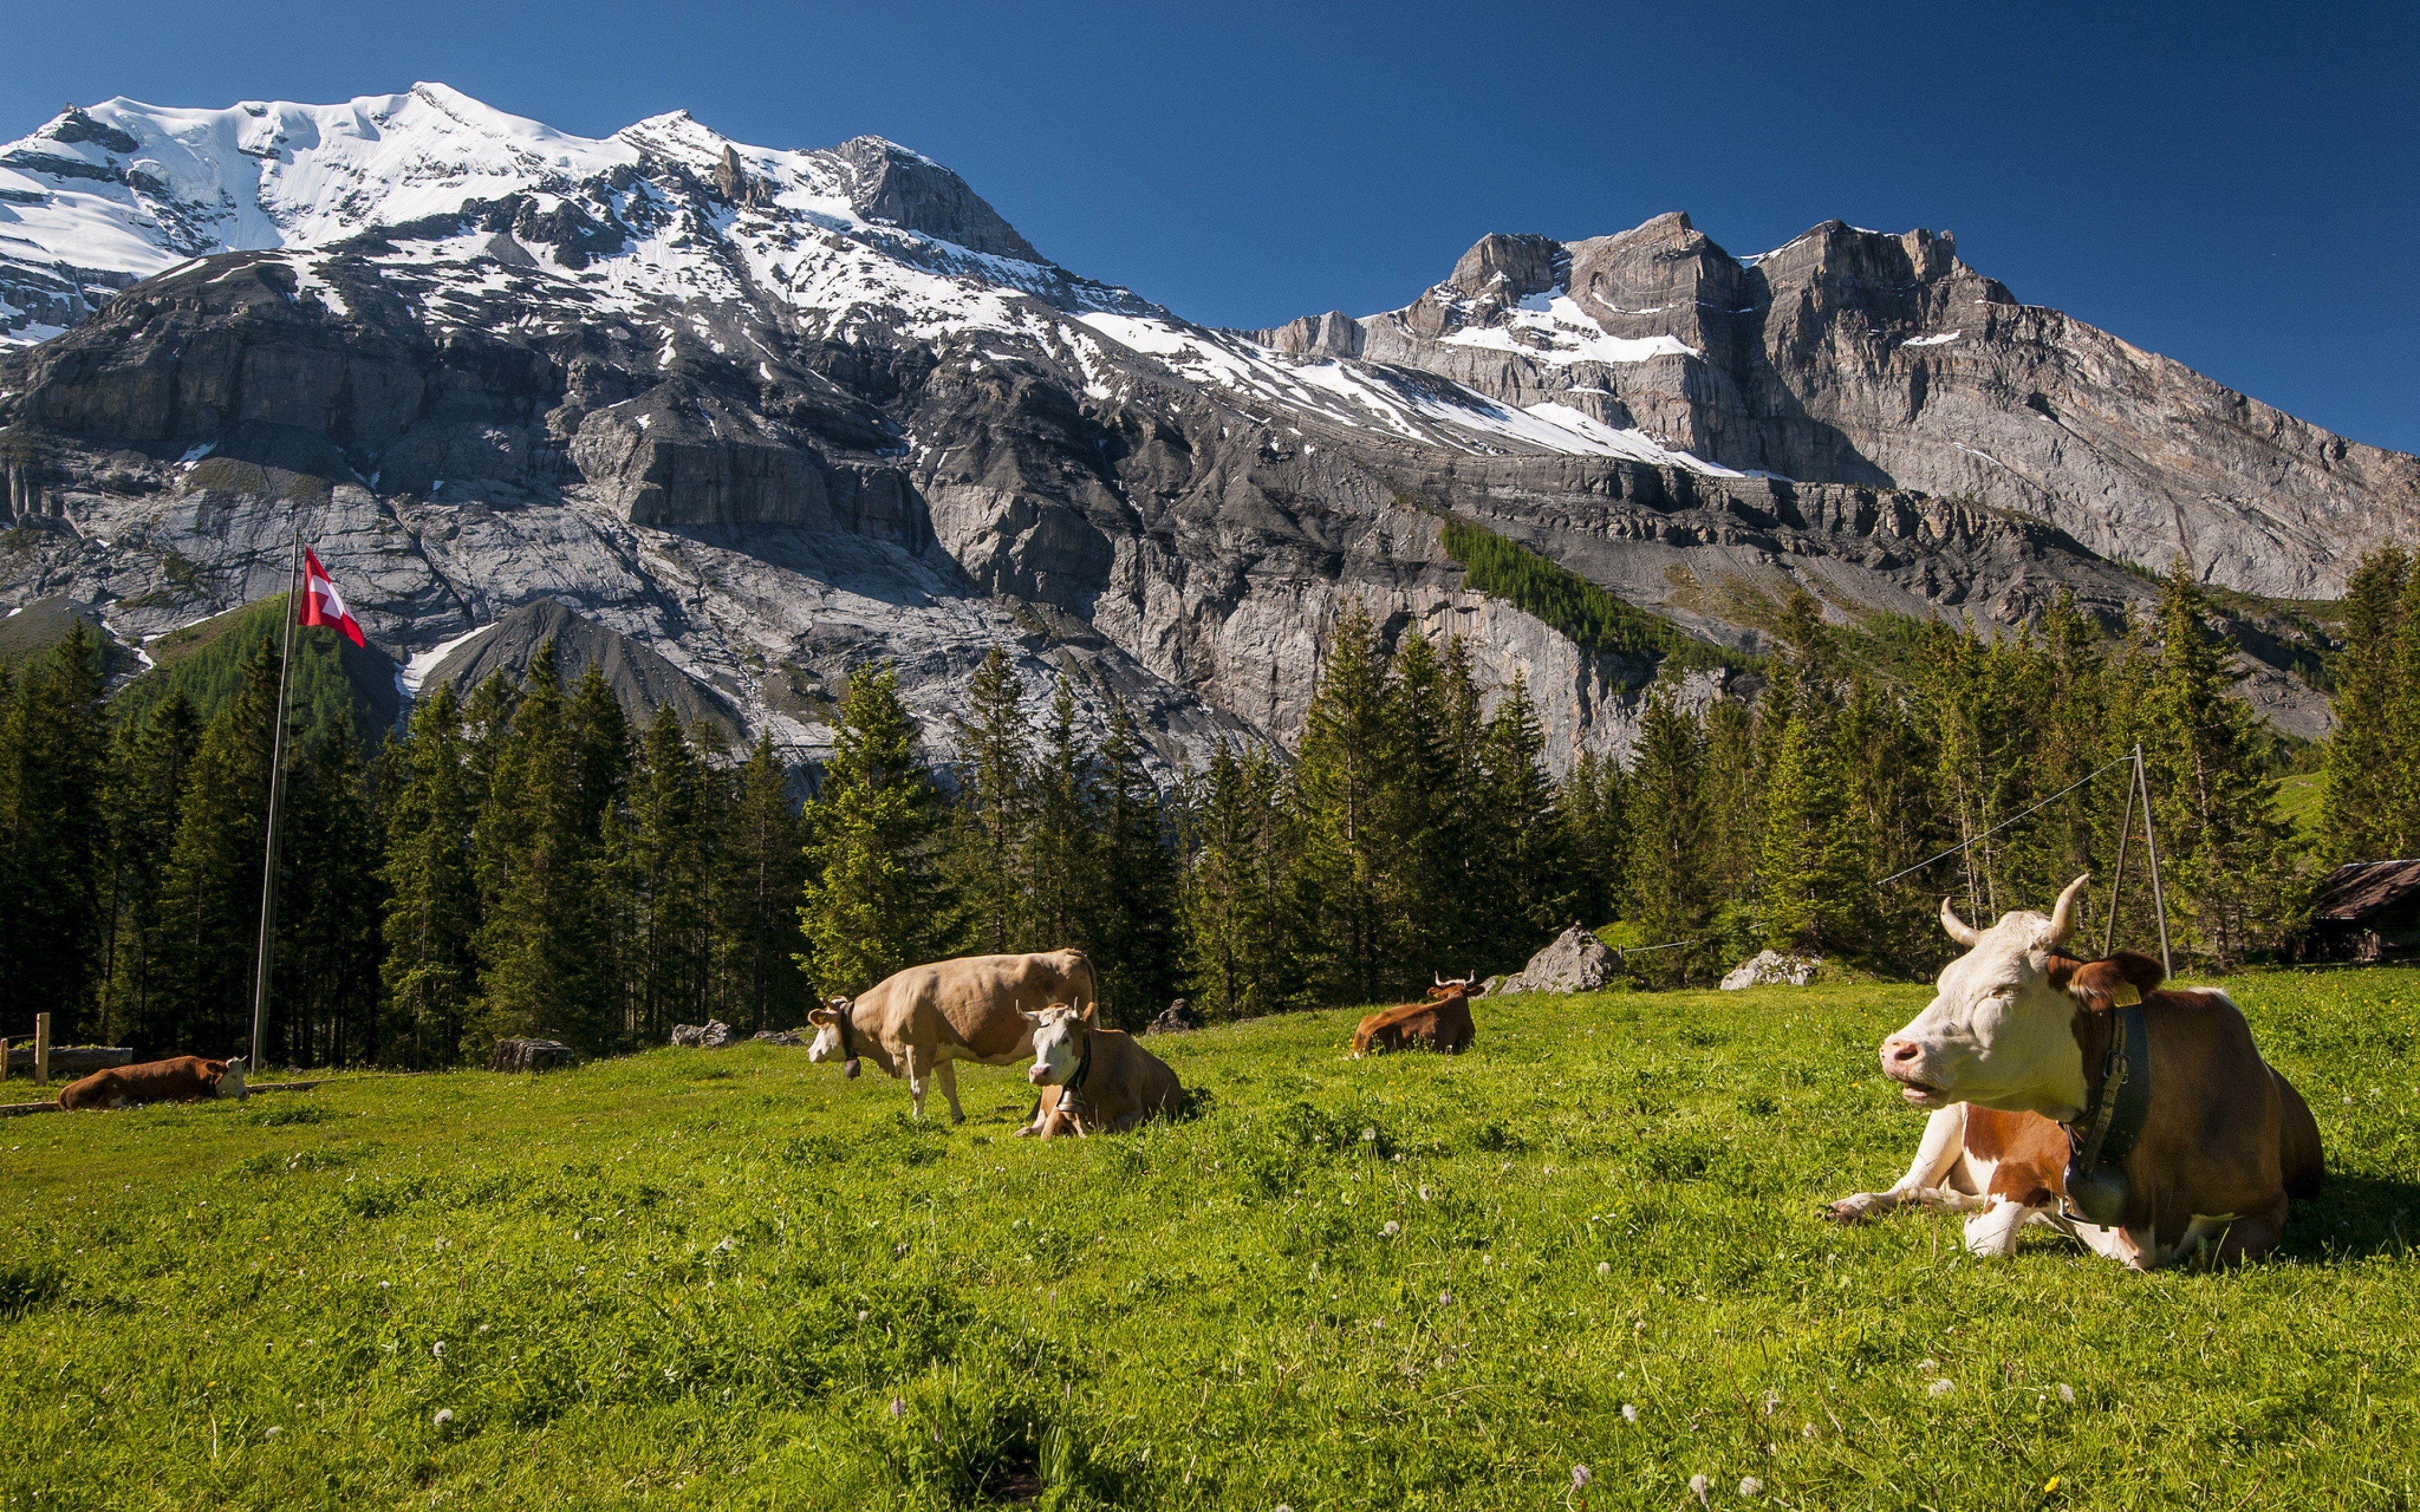  Mountains Cows Meadow Grass Tops Wallpaper Background Ultra HD 4K